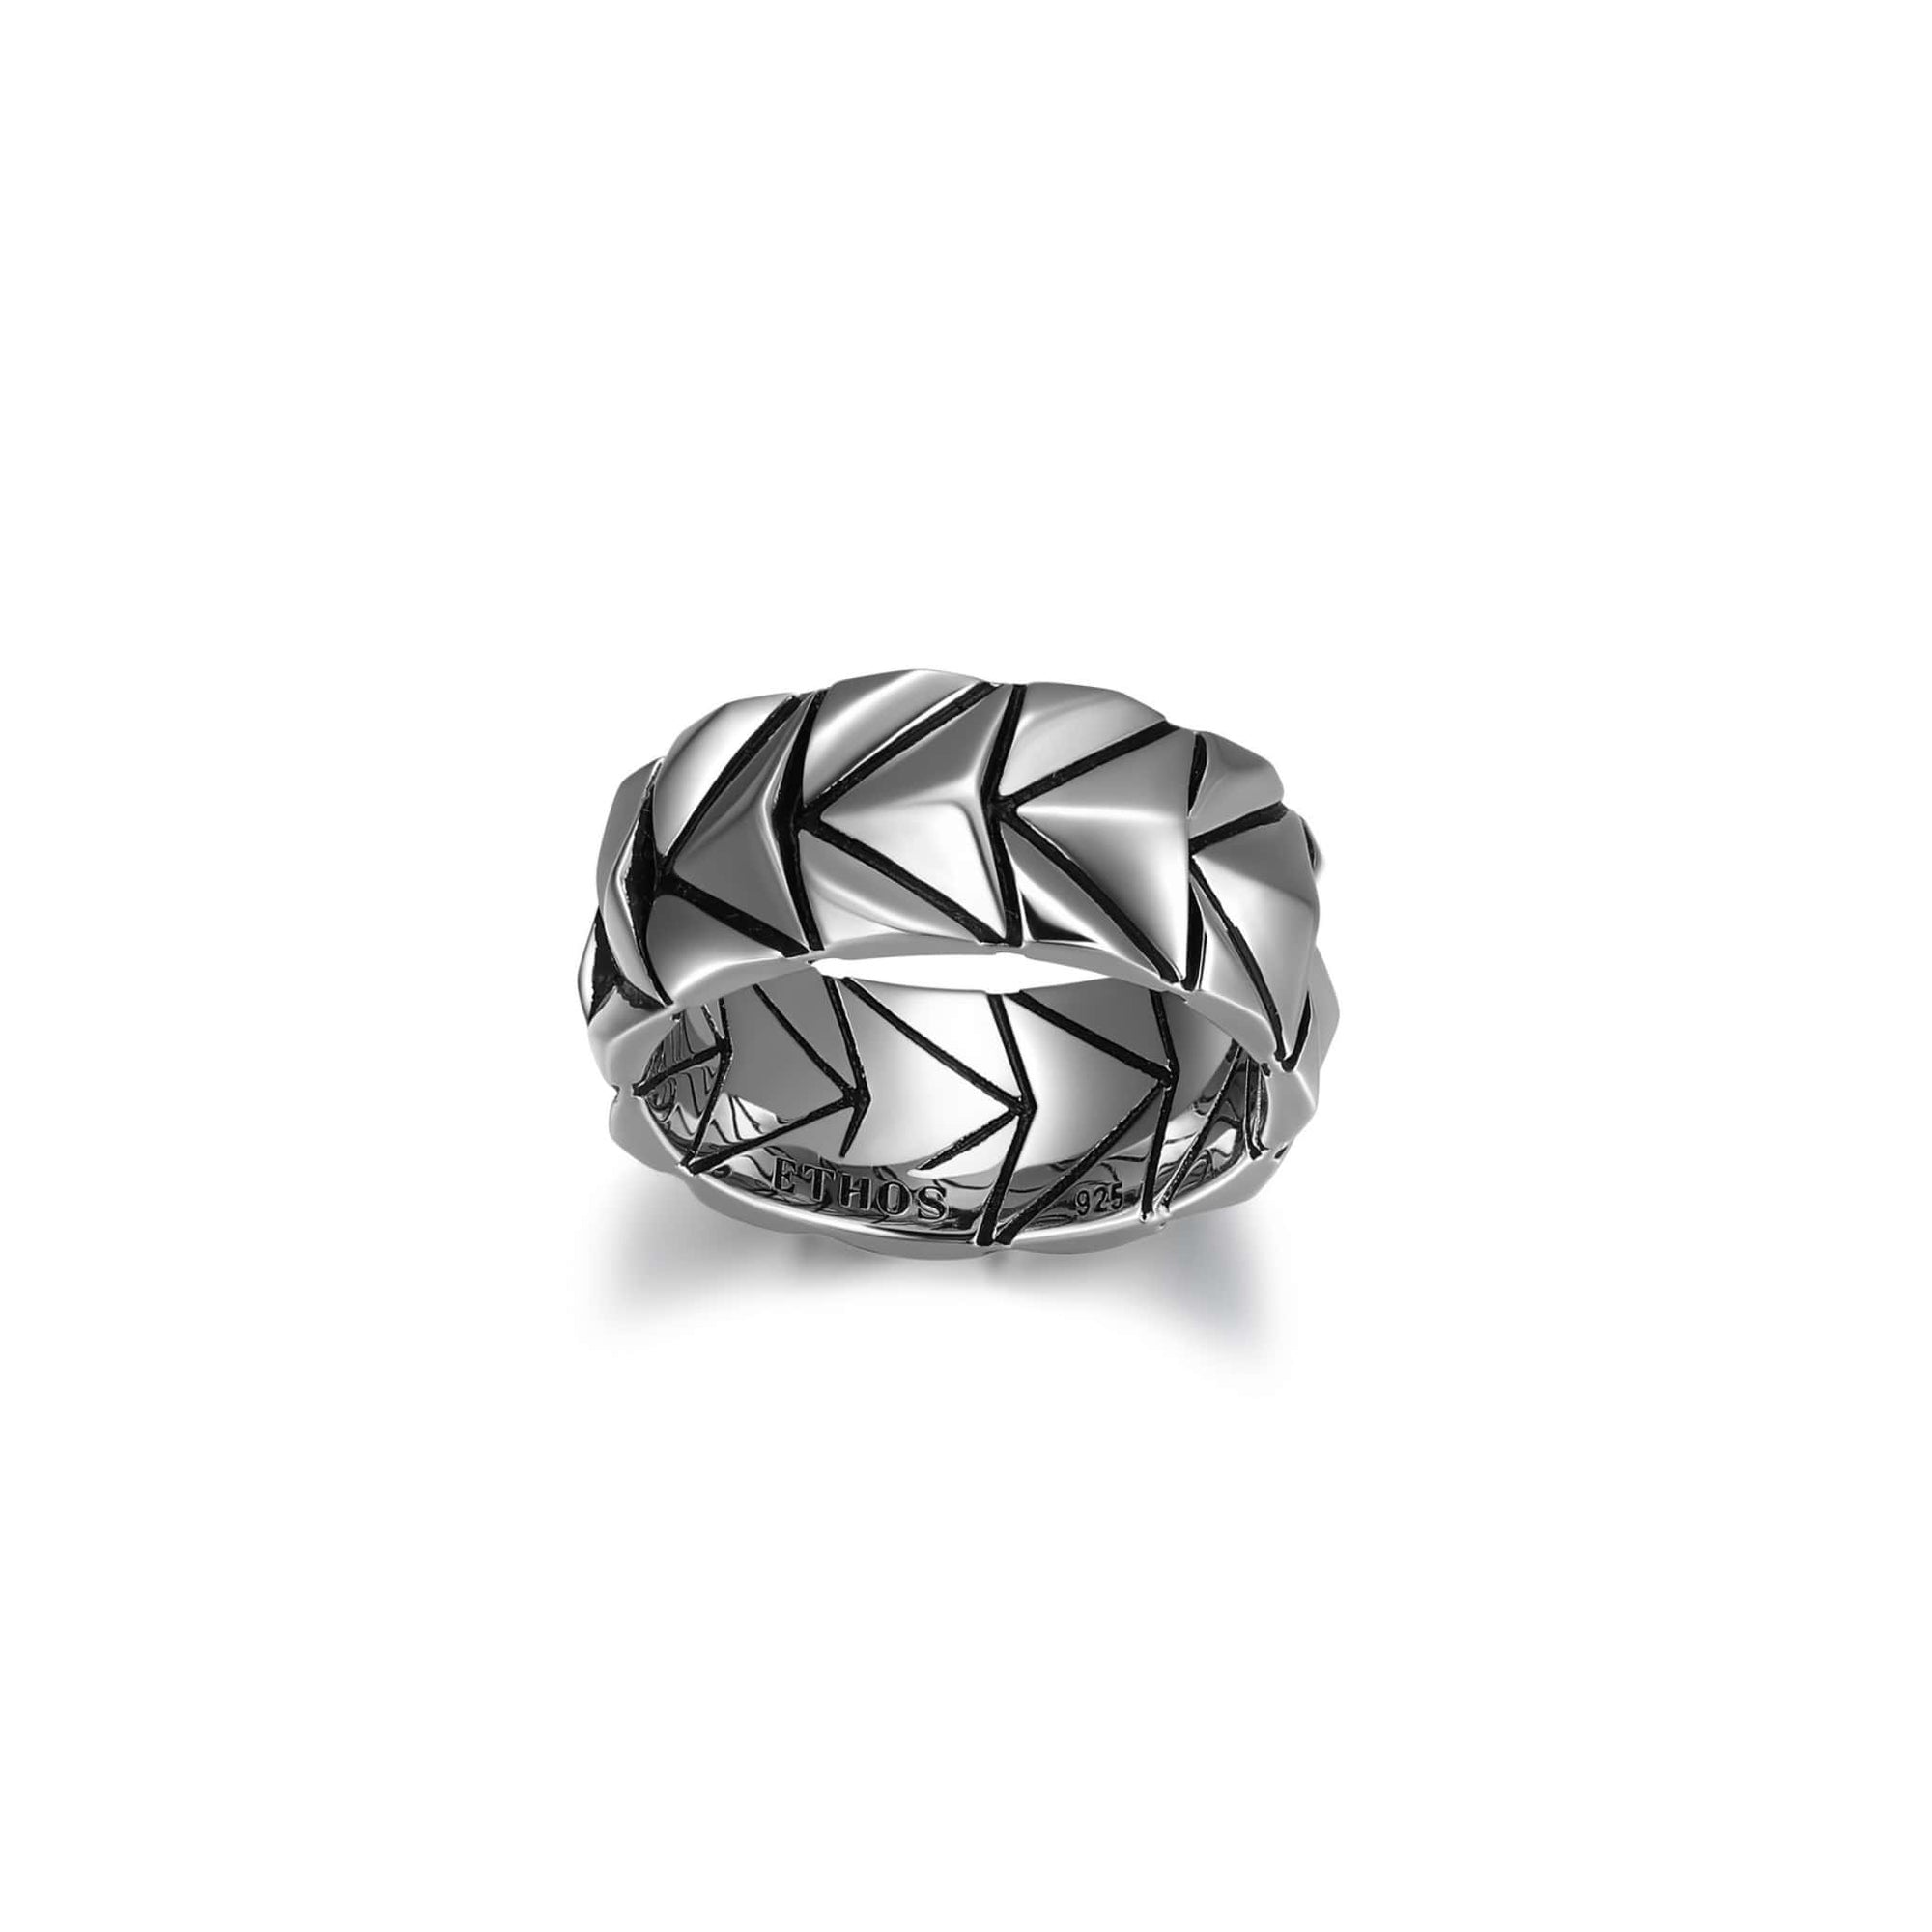 ETHOS "Chevron" Silver Ring at Arman's Jewellers Kitchener